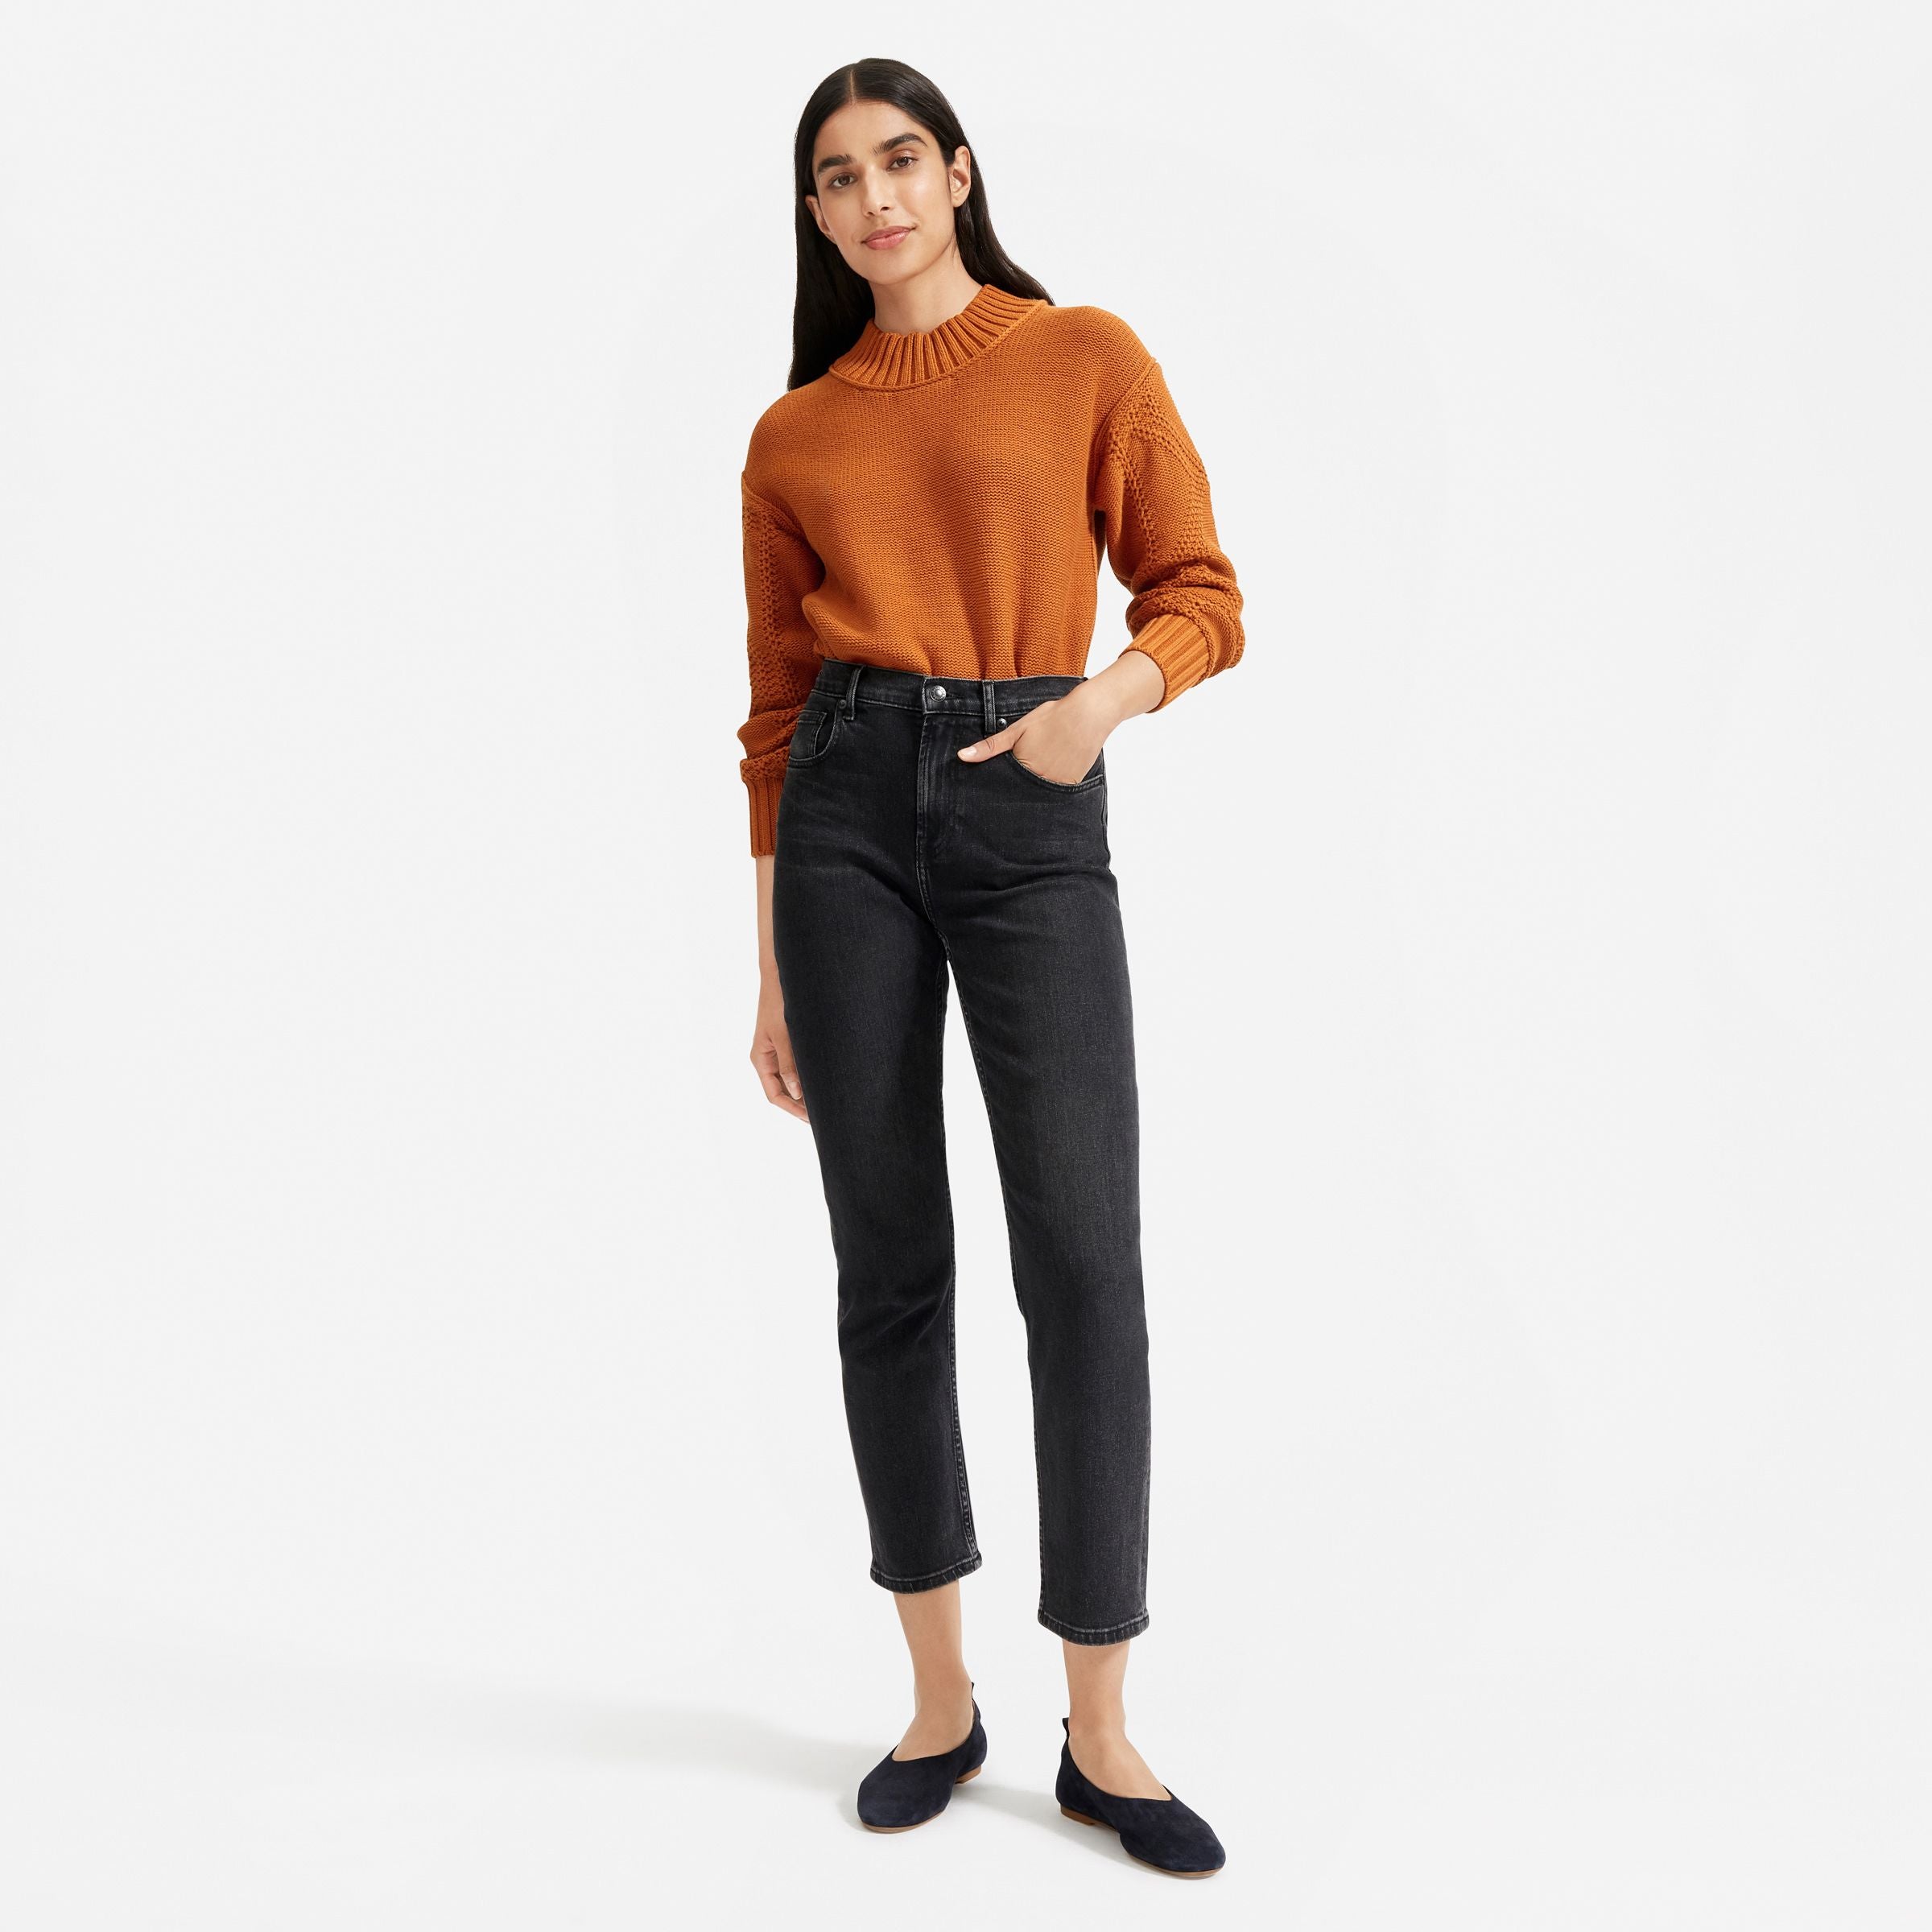 Everlane + The Texture Cotton Cable Sweater